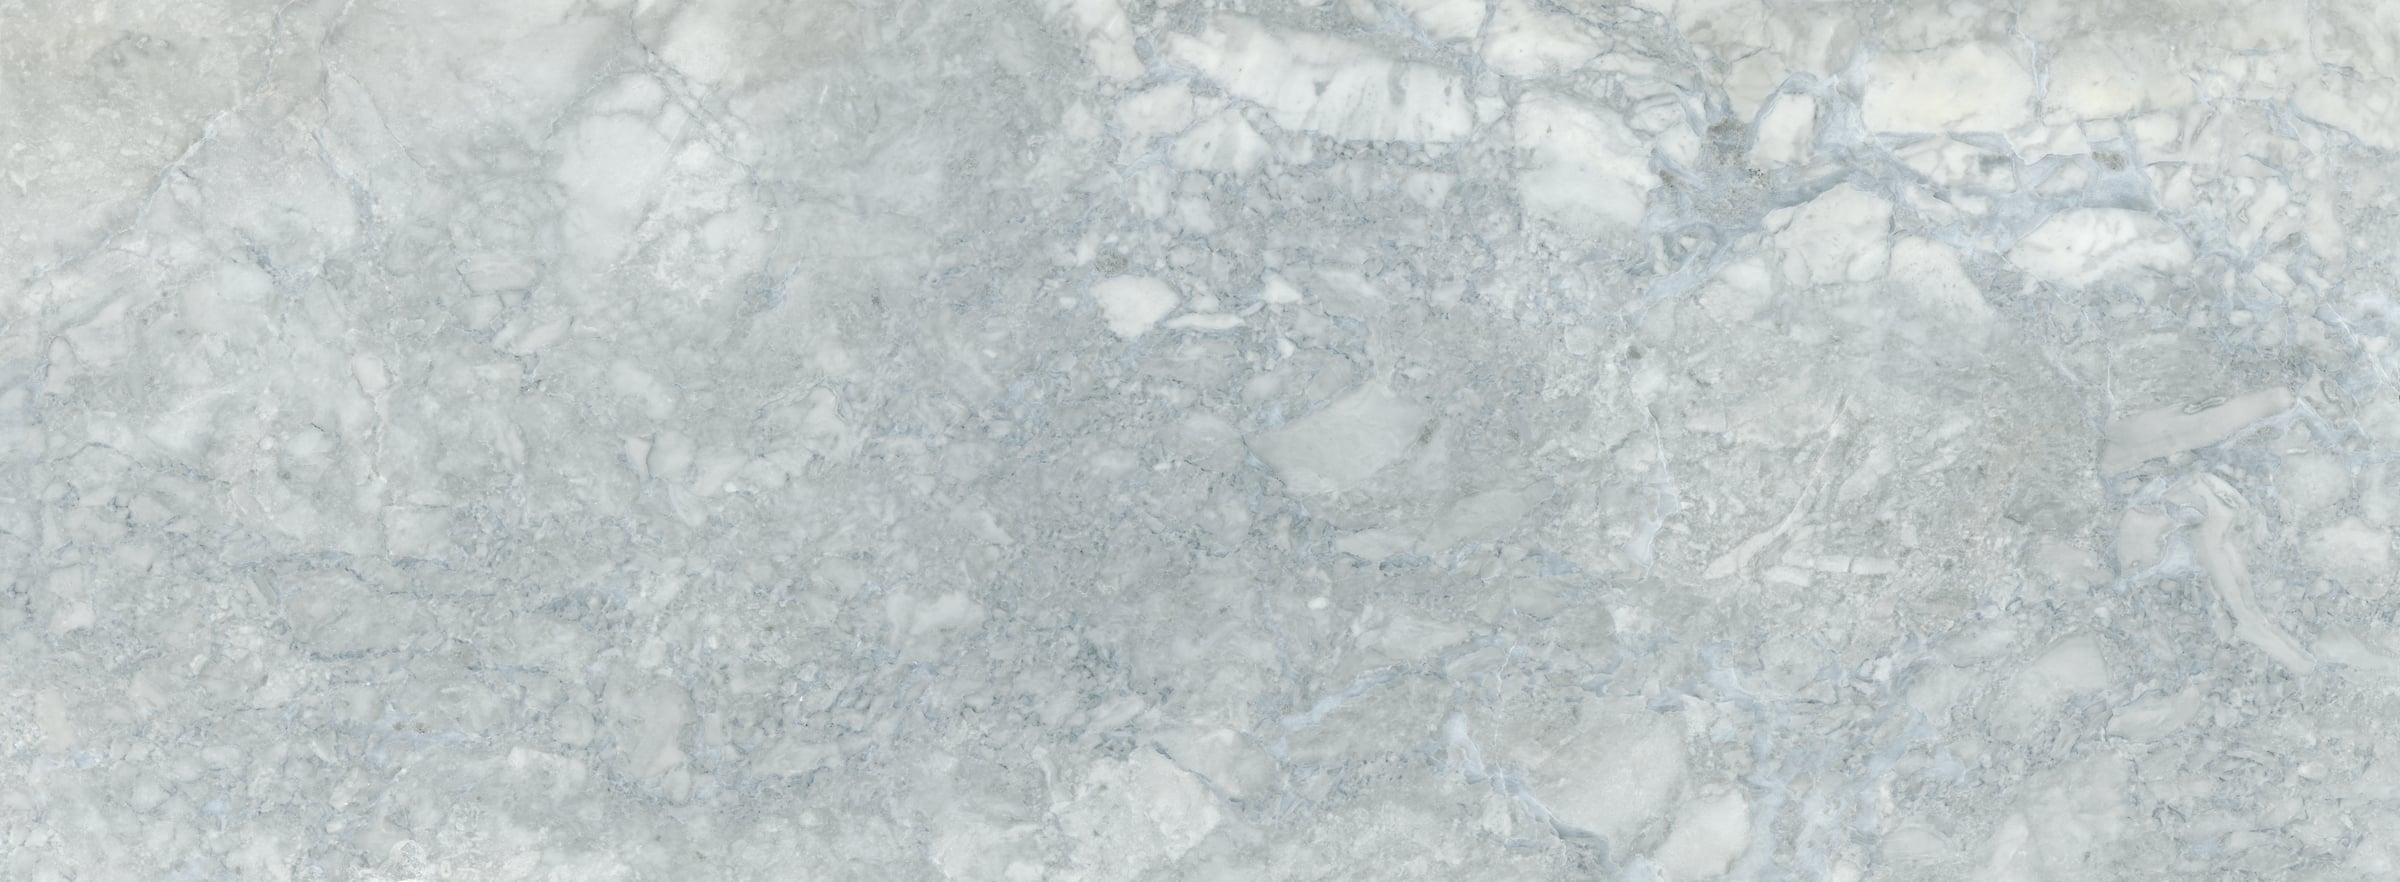 1,889 megapixels! An ultra-high-resolution texture photo file of bianco eclipsia white grey marble stone; gigapixel photograph created by David Lineton.